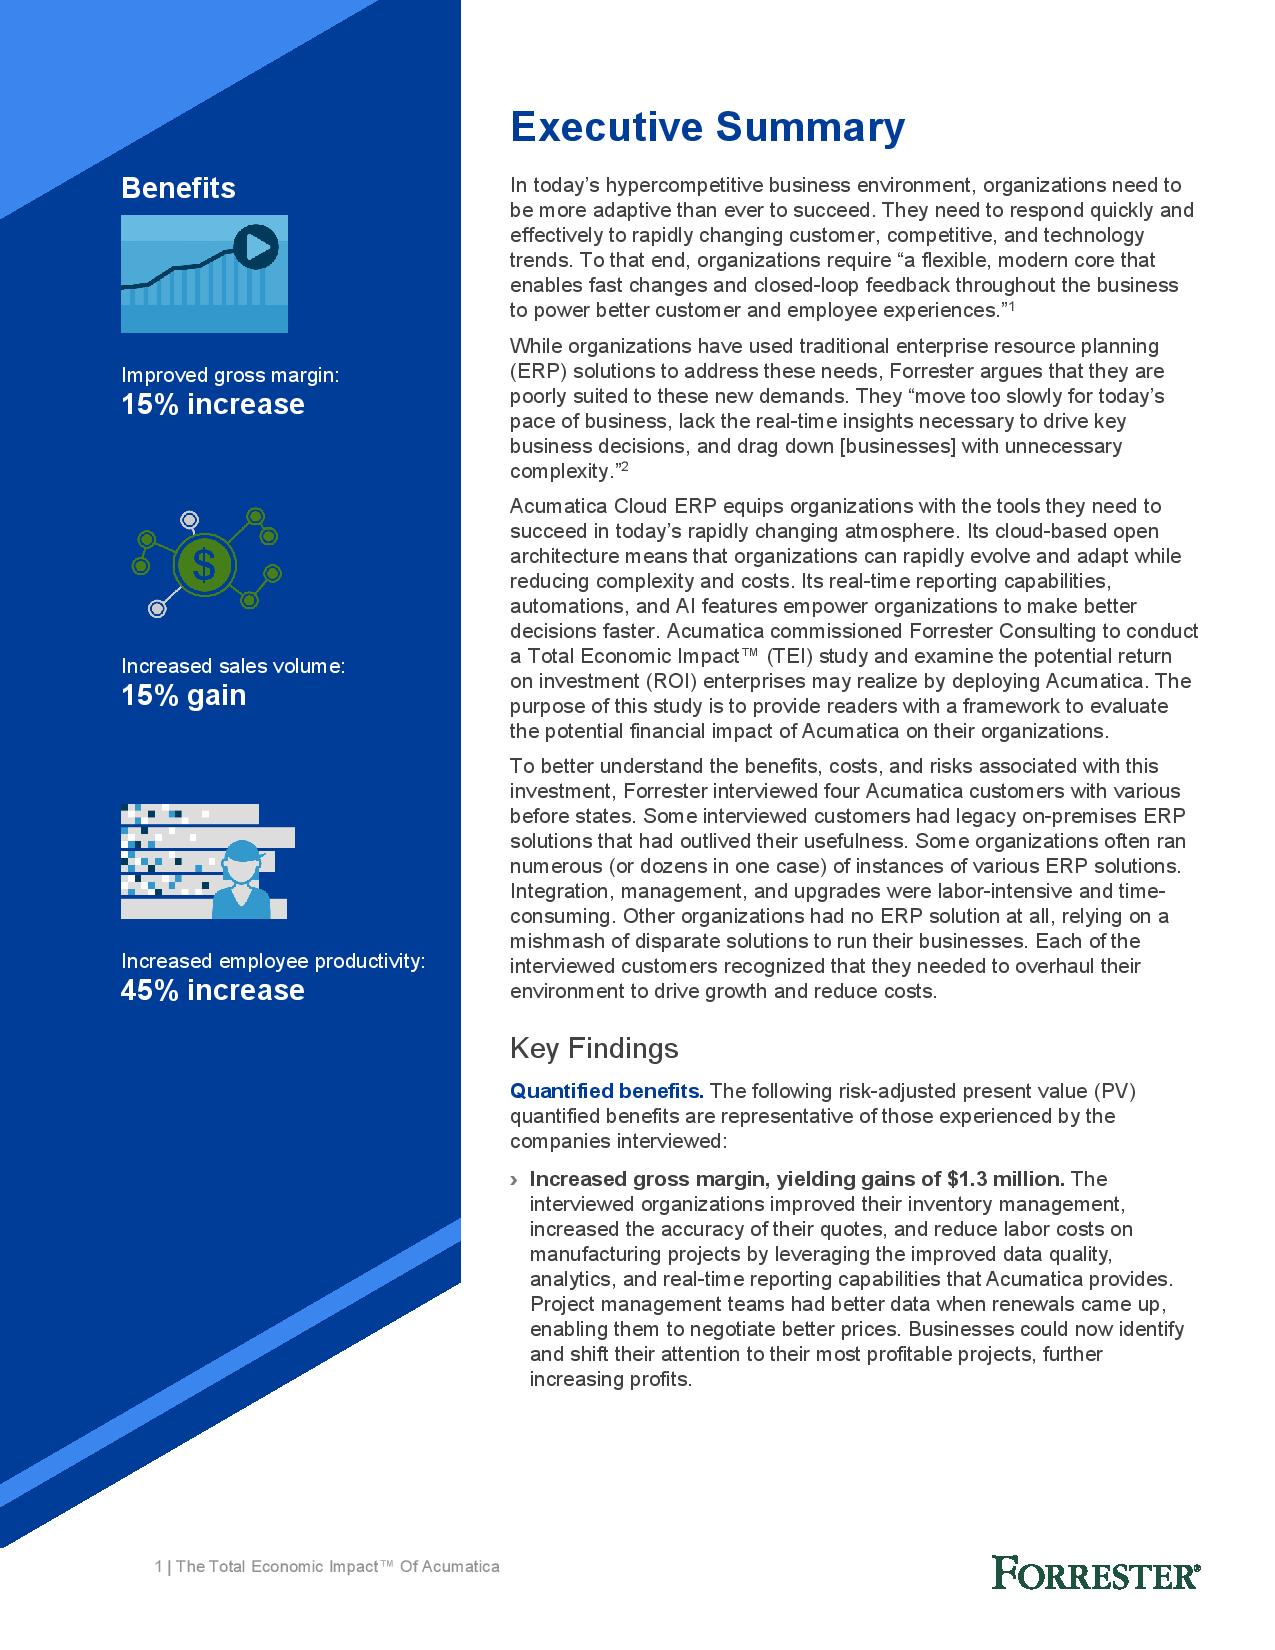 Discover the Financial and Business Benefits of Cloud ERP Adoption, page 2